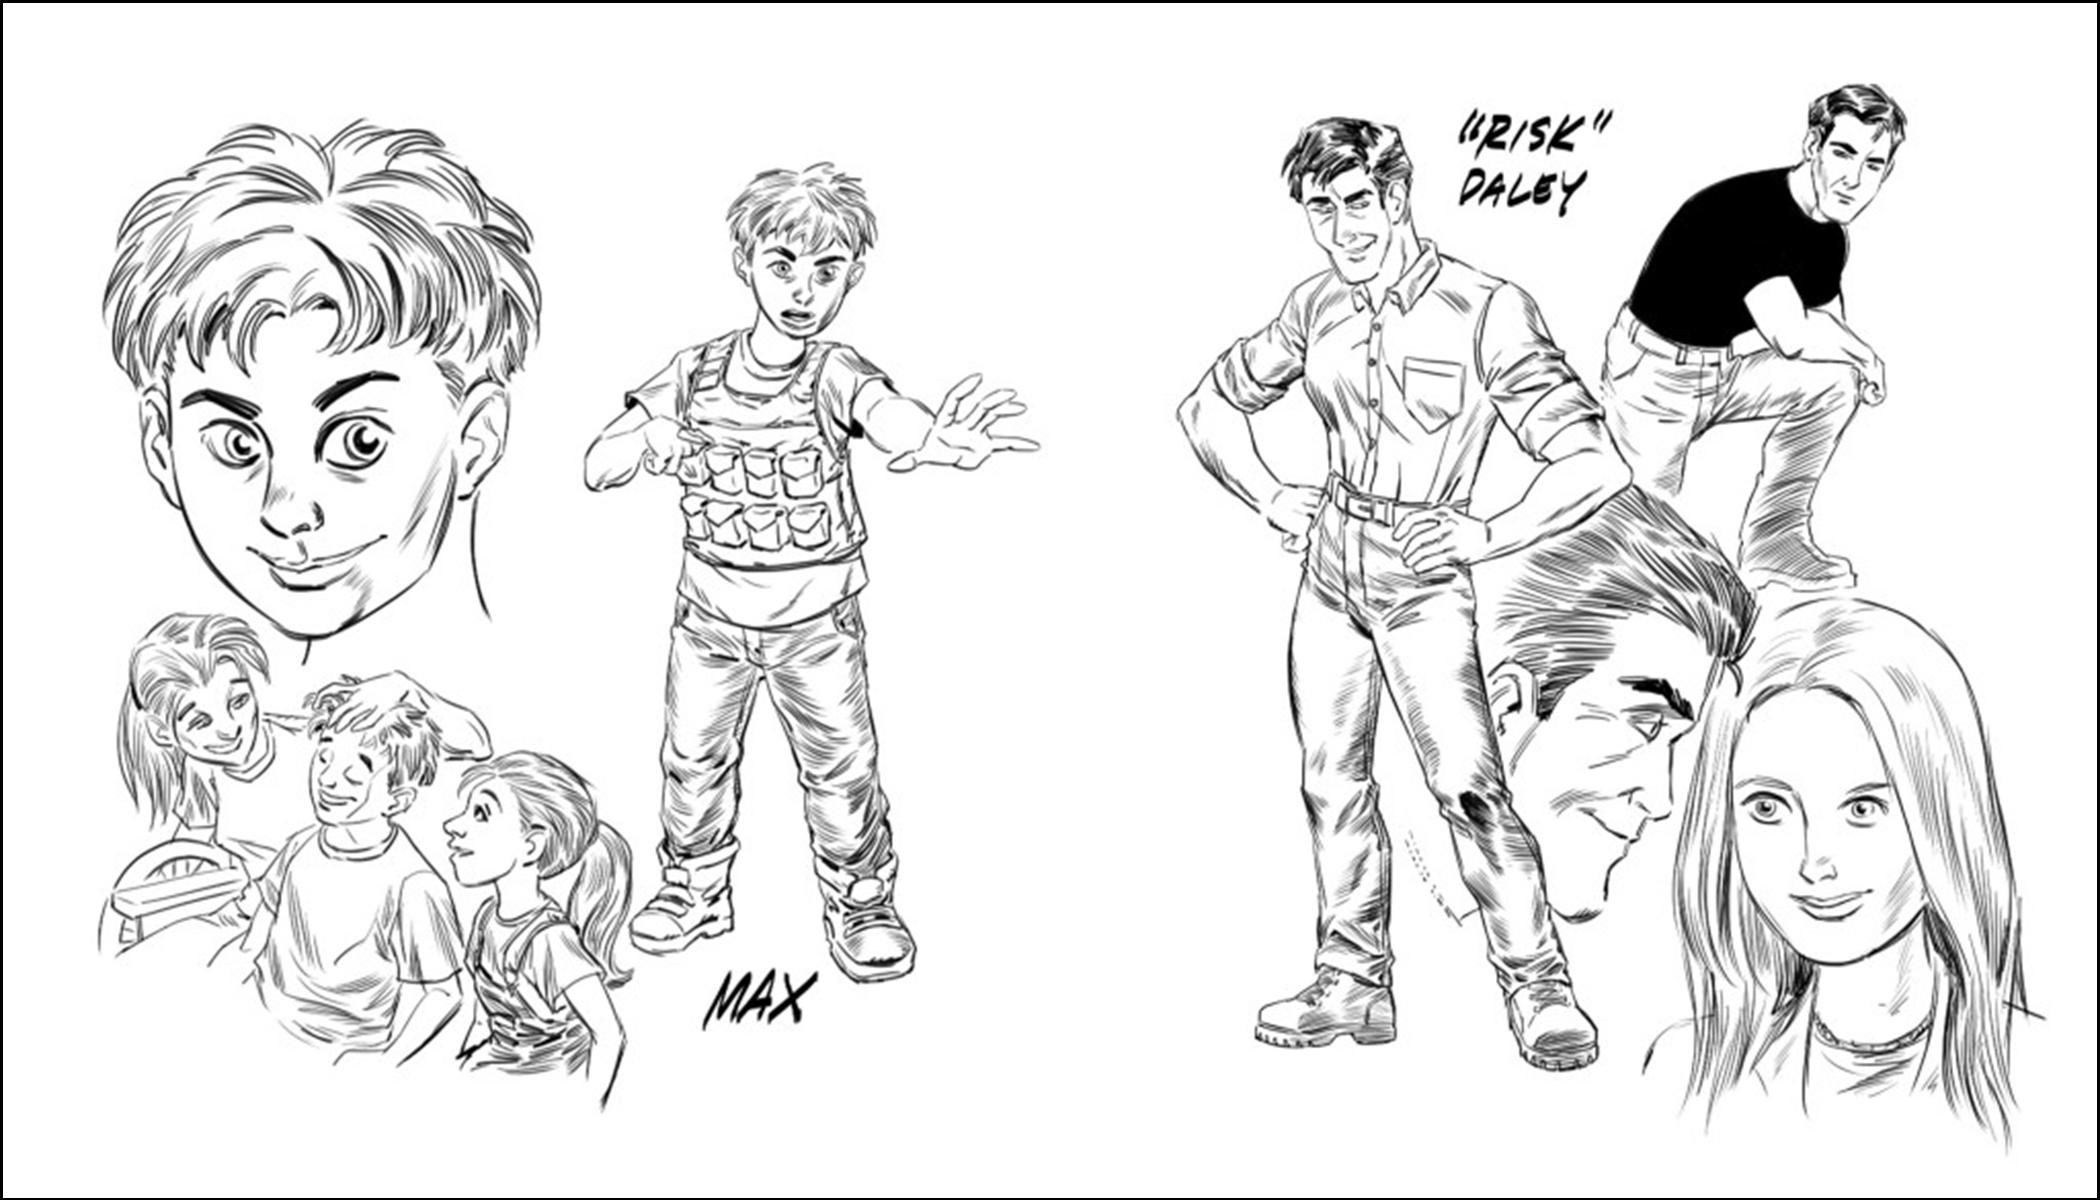 Max Q with his MAP vest, Bryan "Risk" Daley looking racer chic, and the three Hammer sisters: Monica and Mario ("Mary-oh") flank Max, while Monnarae appears with Risk. All artwork by Aldin Baroza (2016).